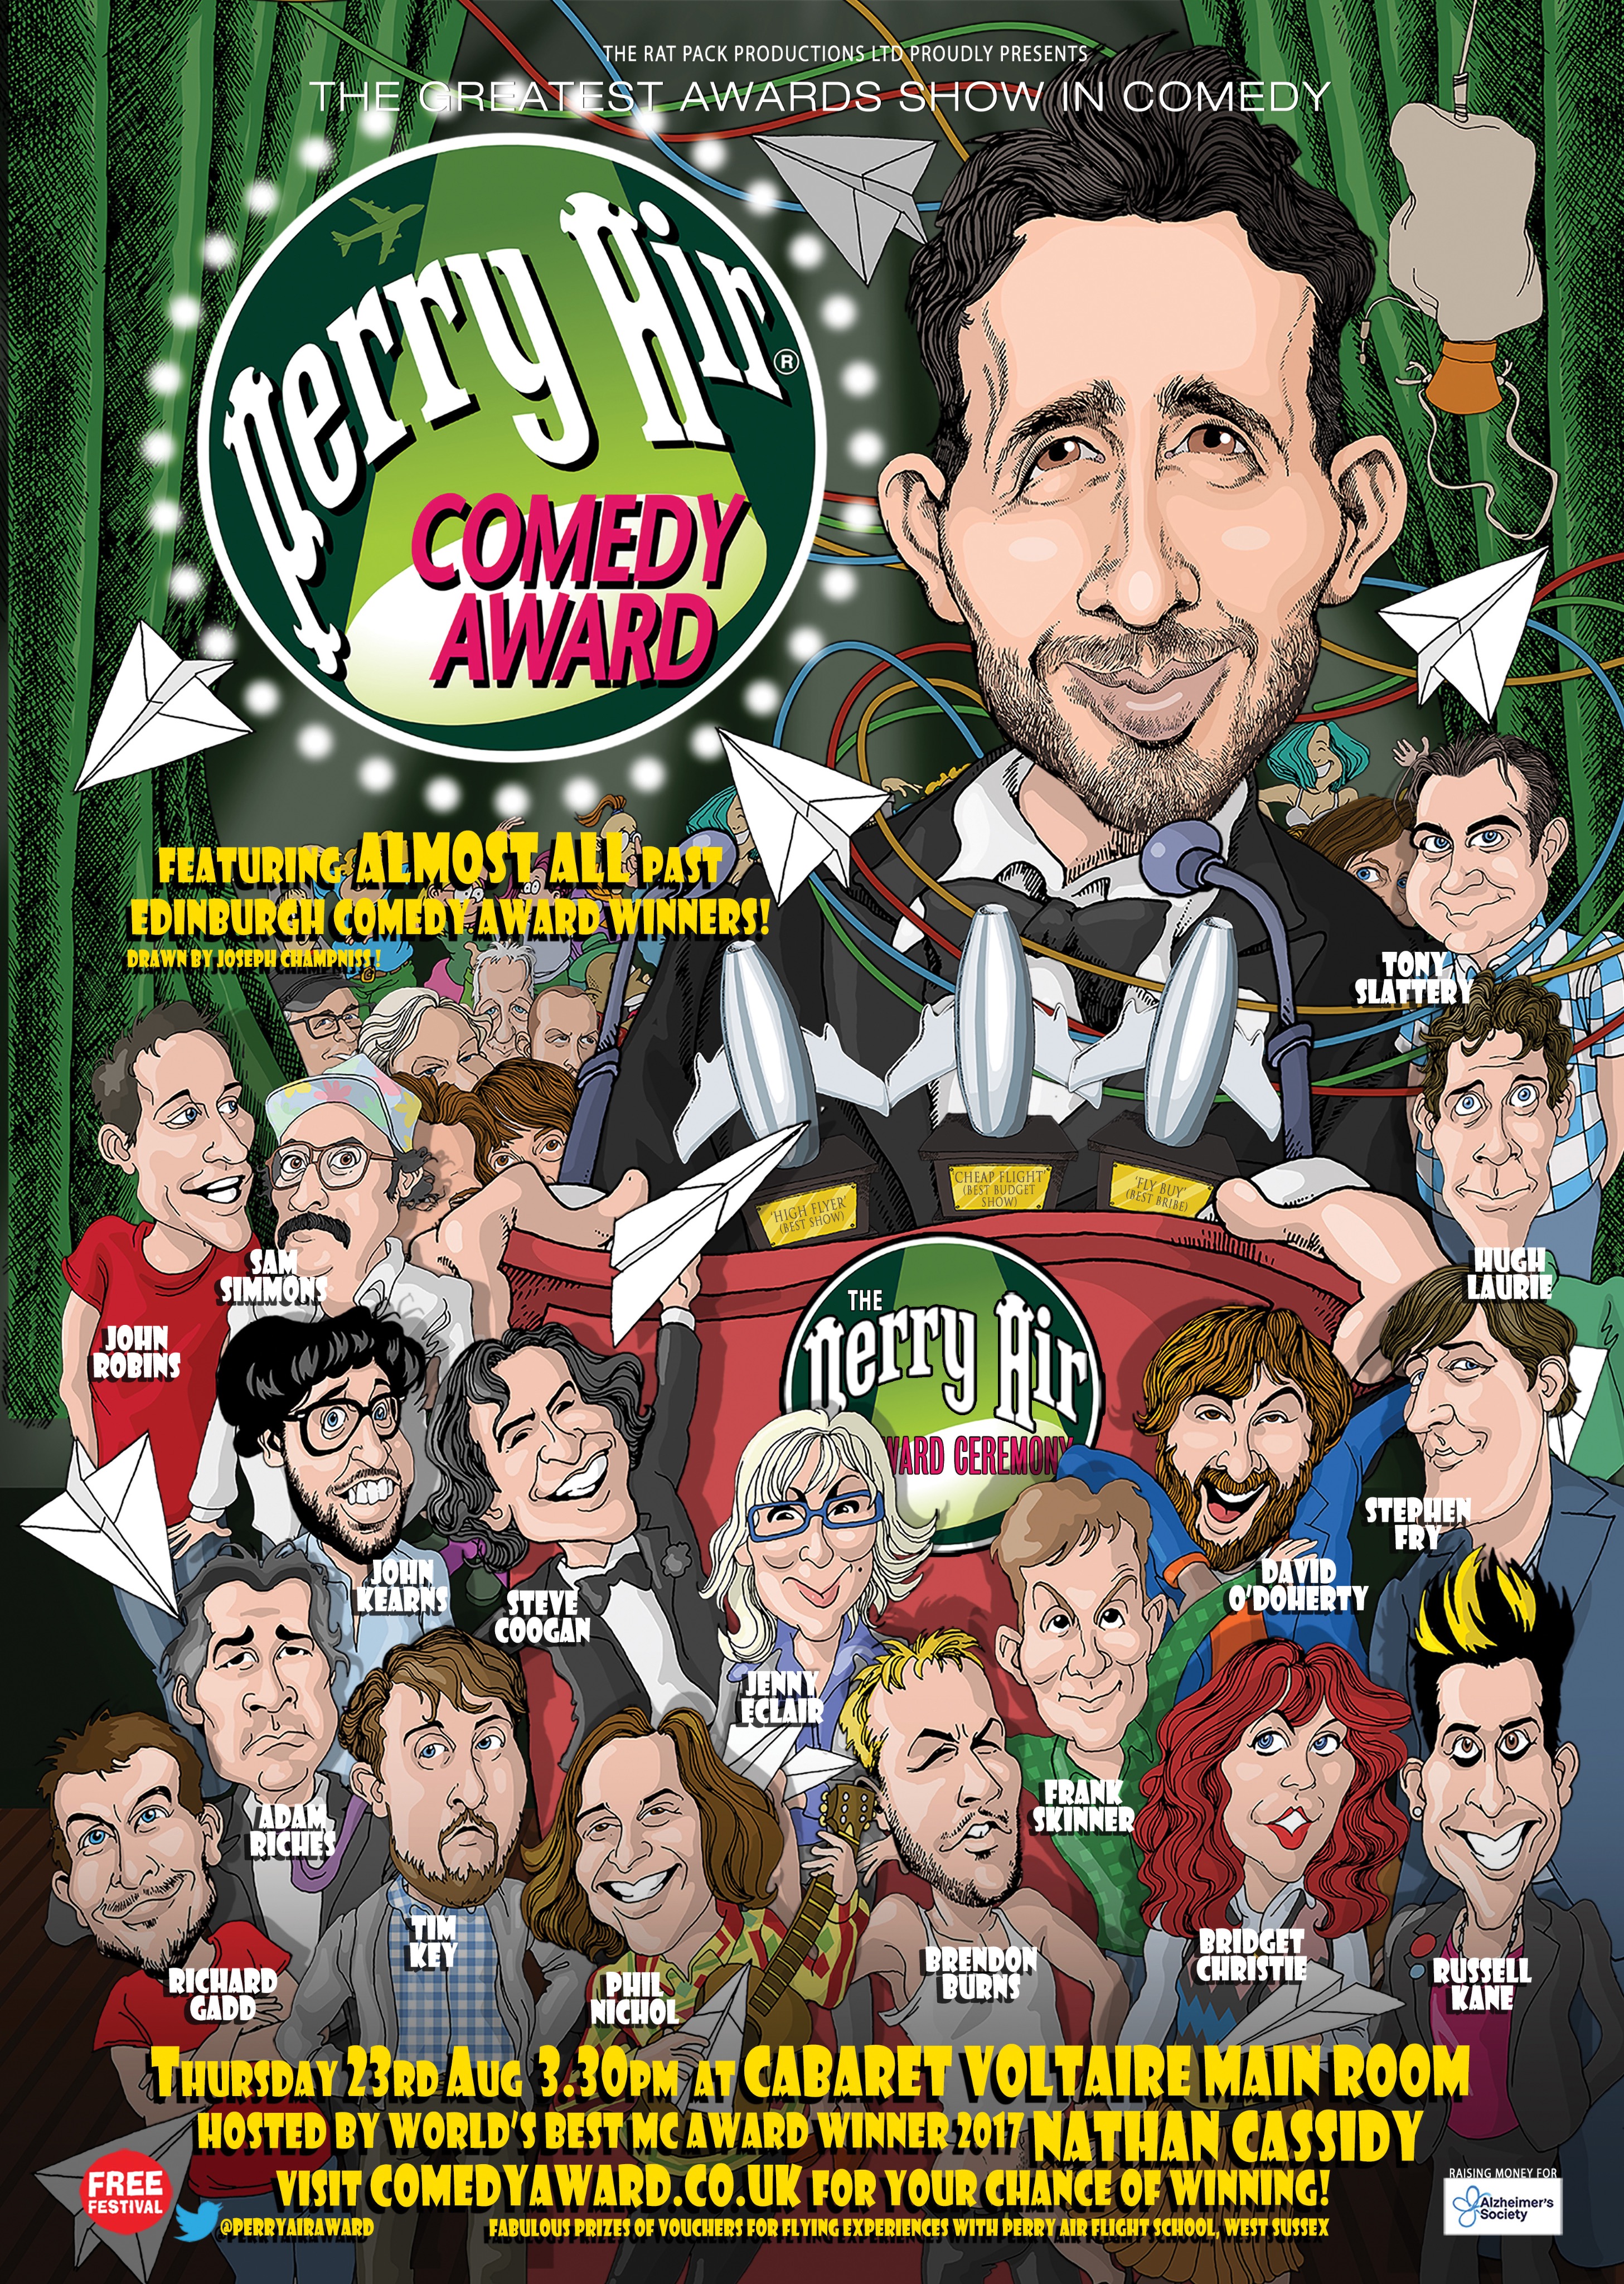 The poster for Perry Air Comedy Award Ceremony